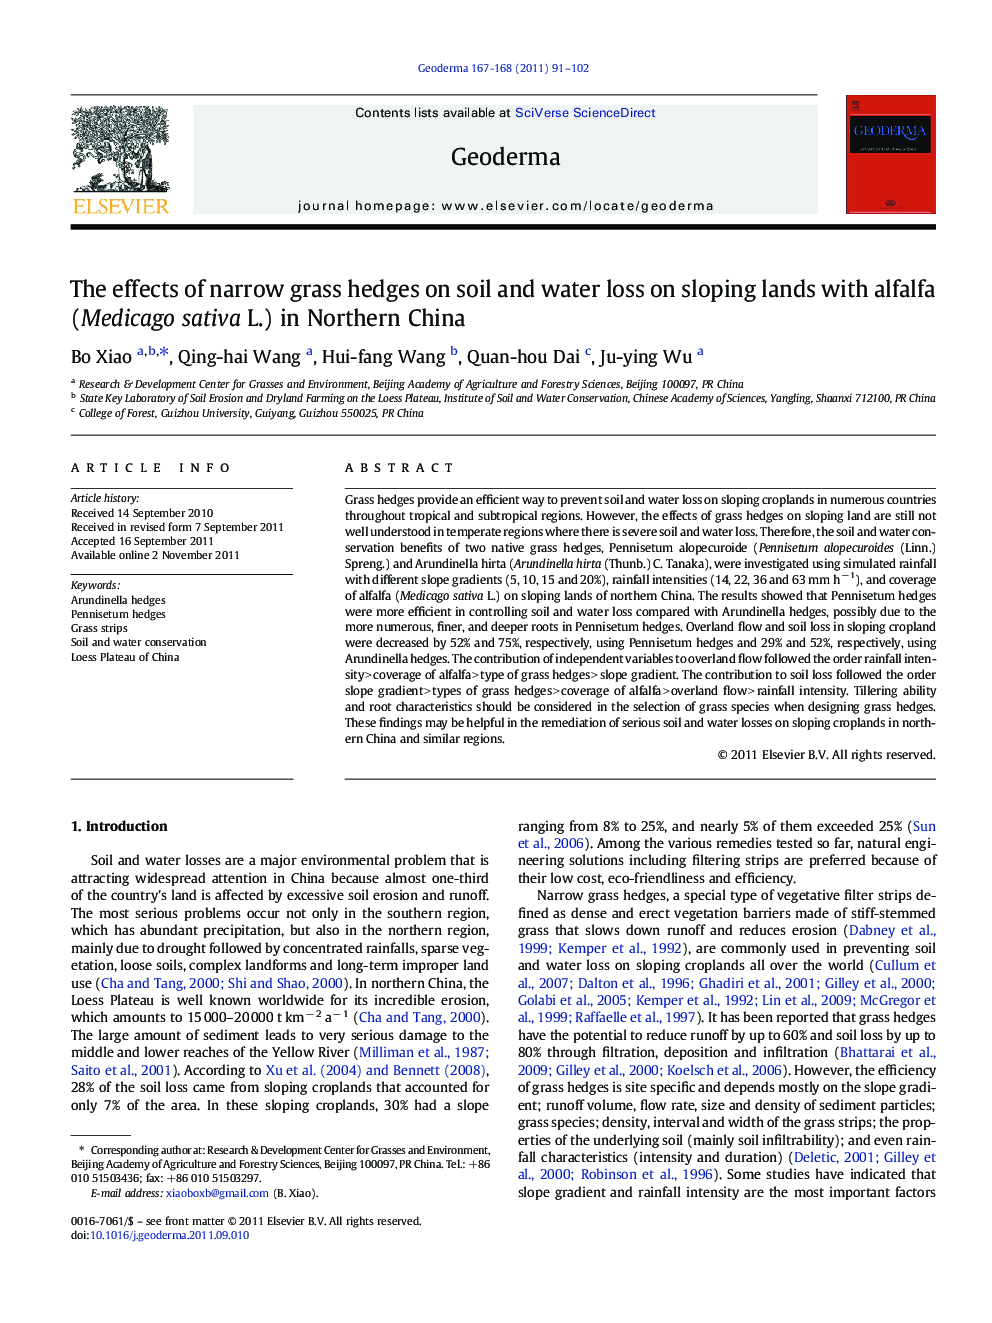 The effects of narrow grass hedges on soil and water loss on sloping lands with alfalfa (Medicago sativa L.) in Northern China